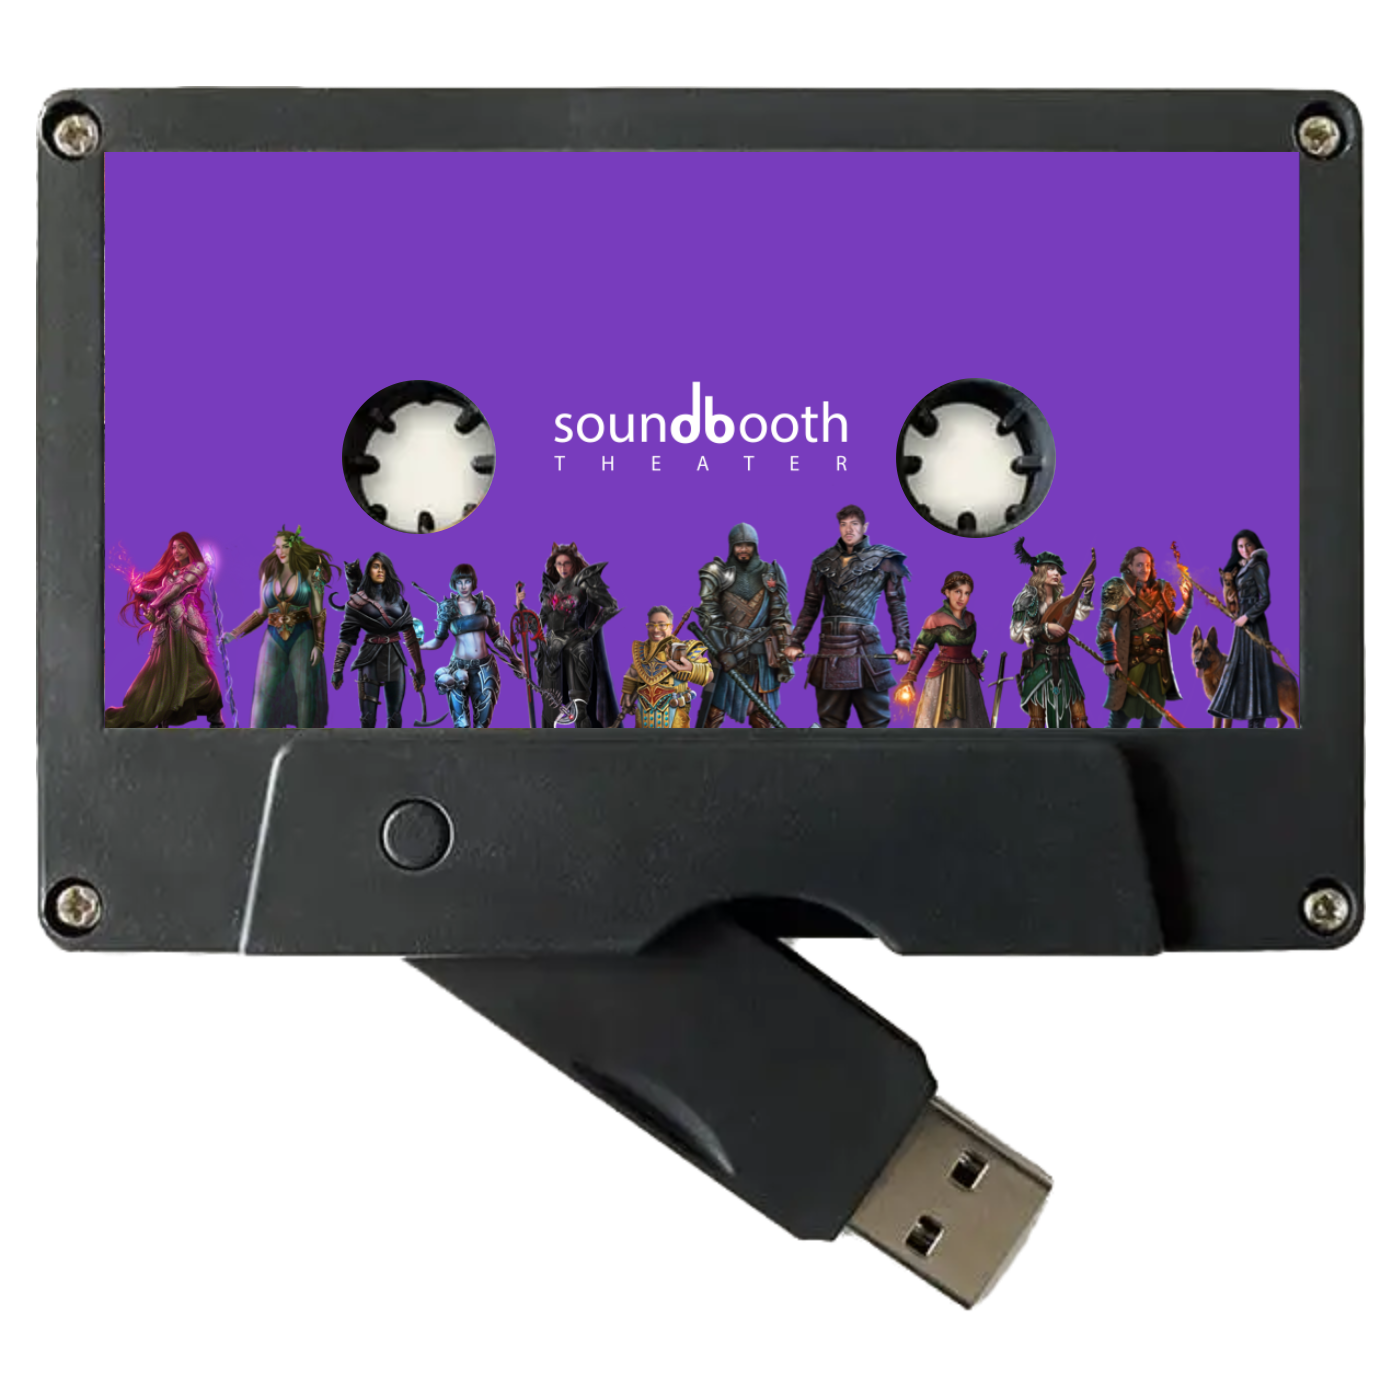 Soundbooth Theater’s Greatest Hits “Cassette” USB